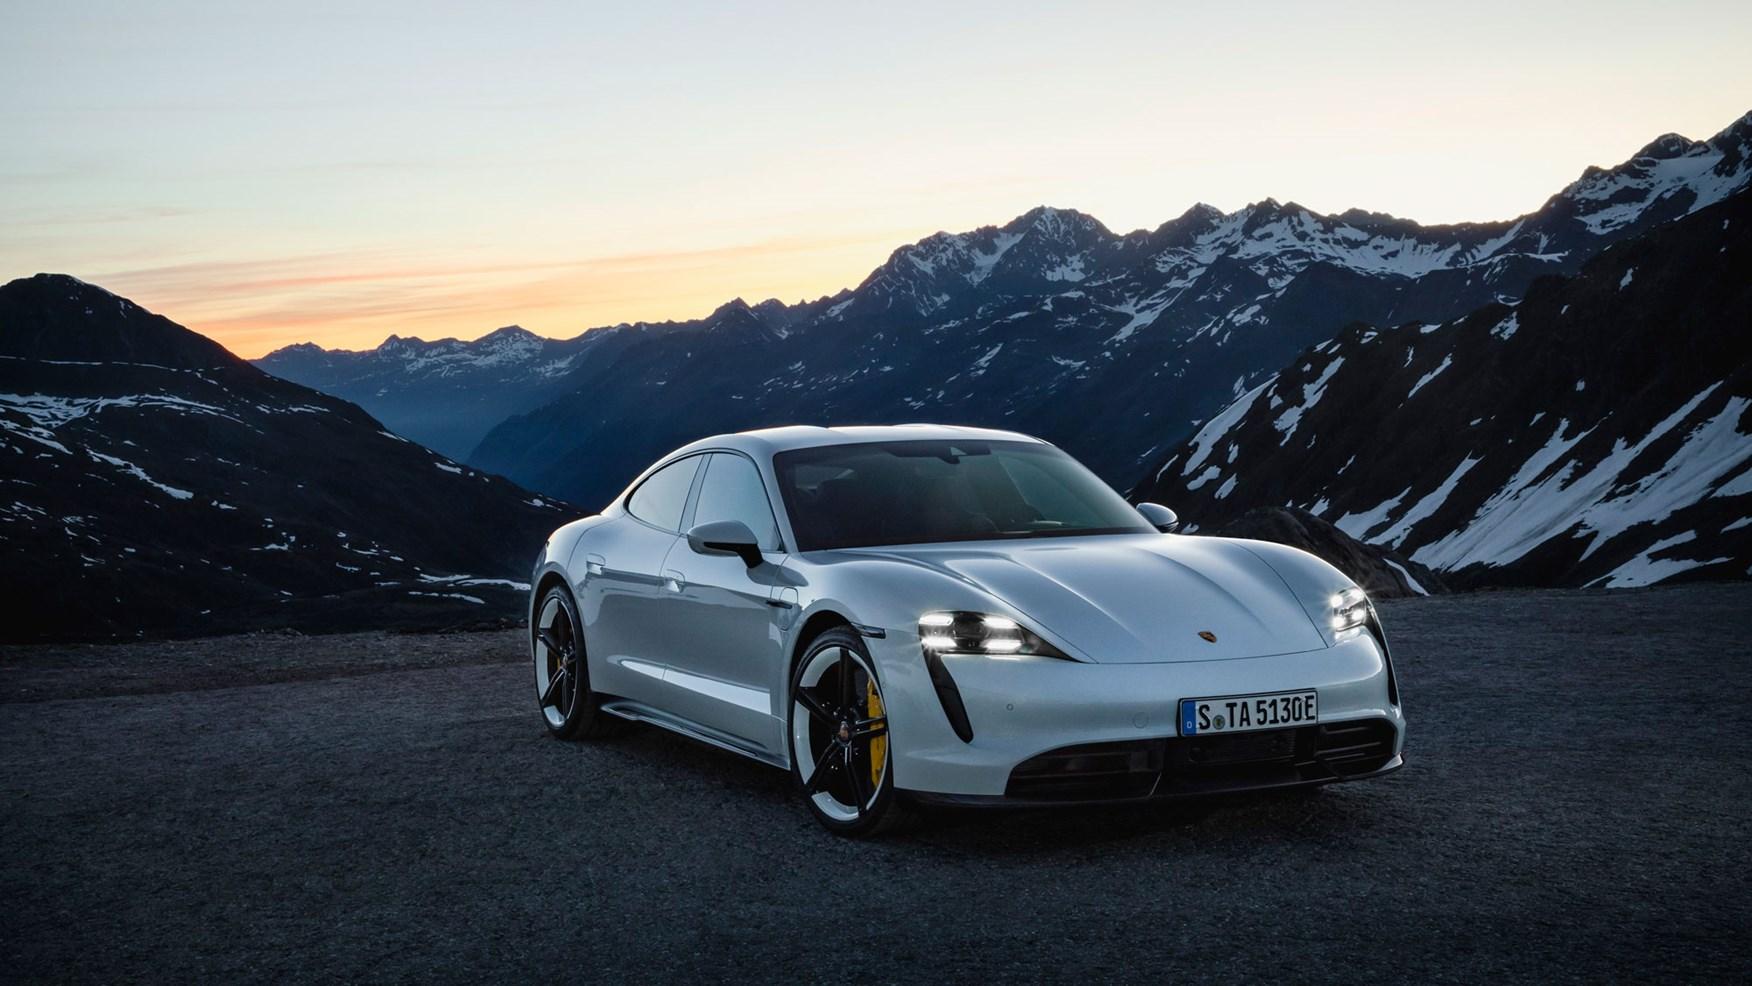 Porsche Taycan: Specs, Pricing And More On New High Tech